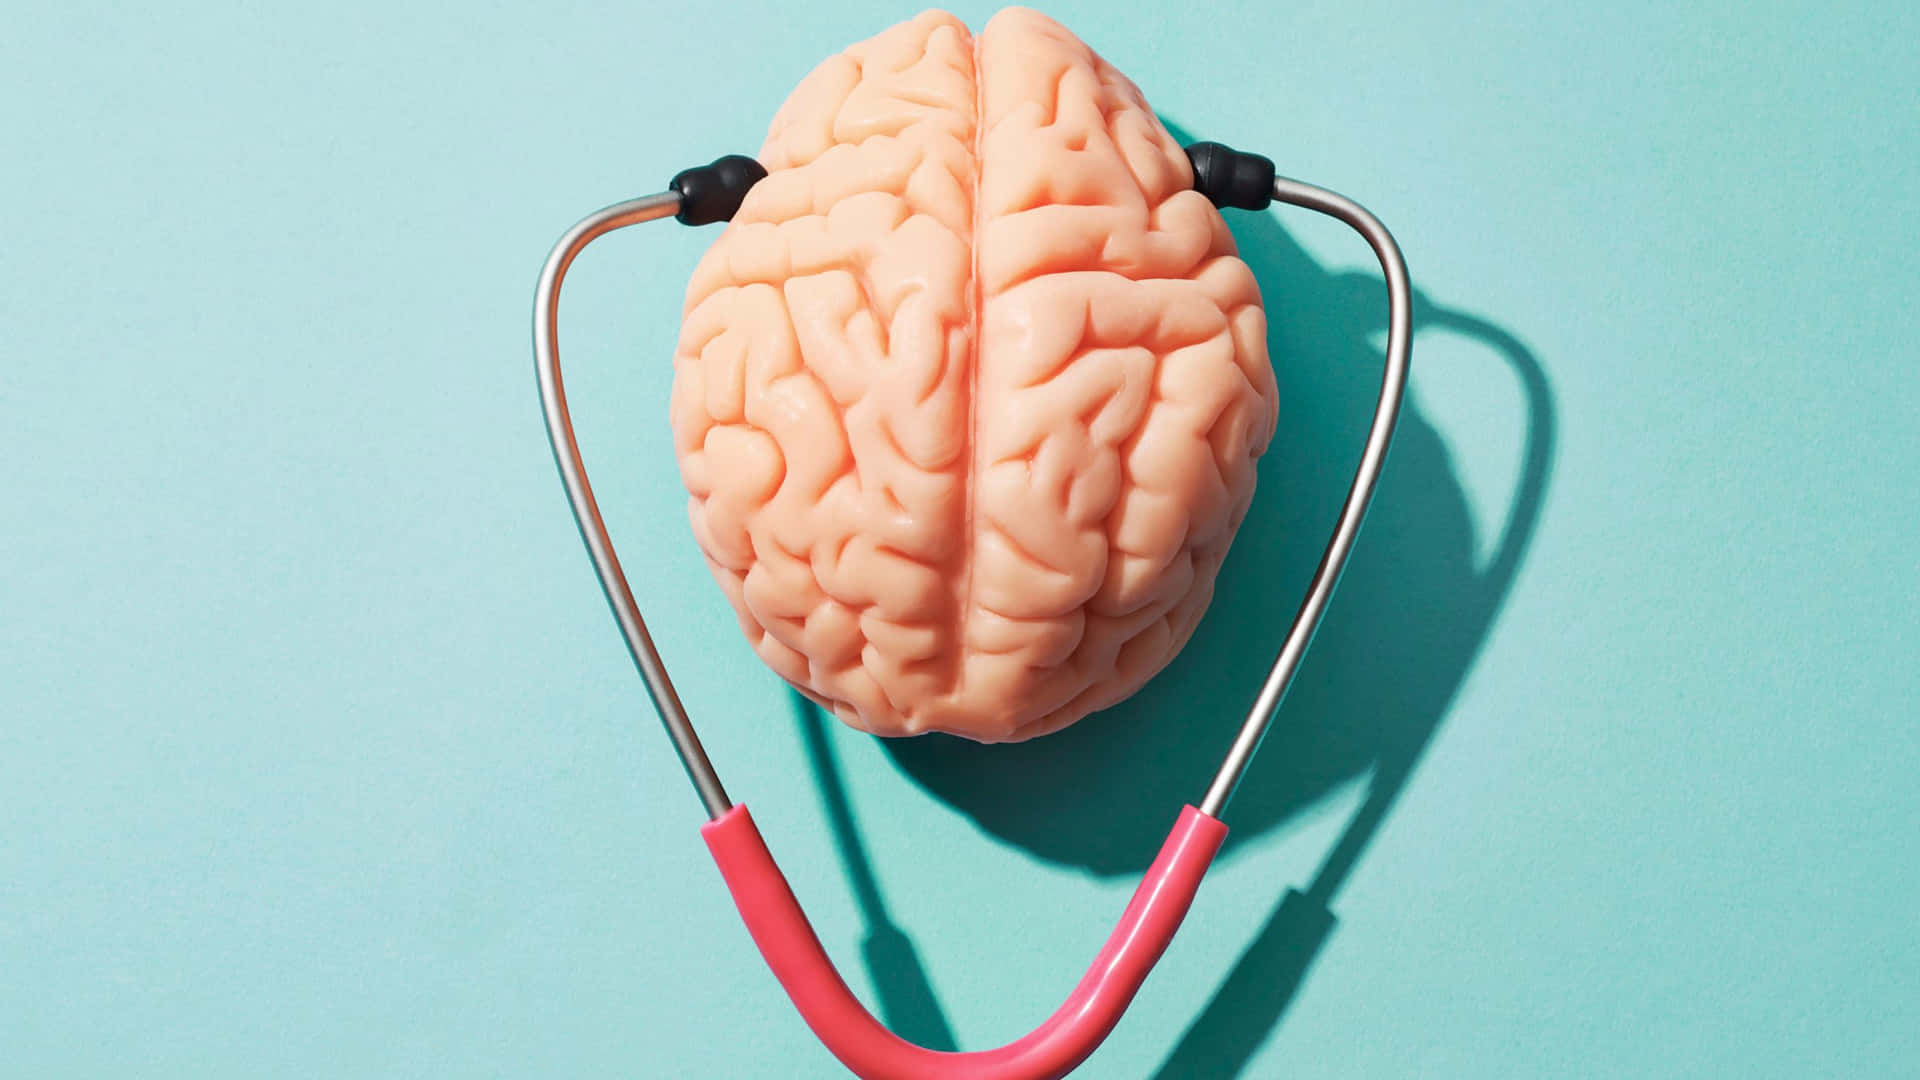 A Brain With A Stethoscope Attached To It